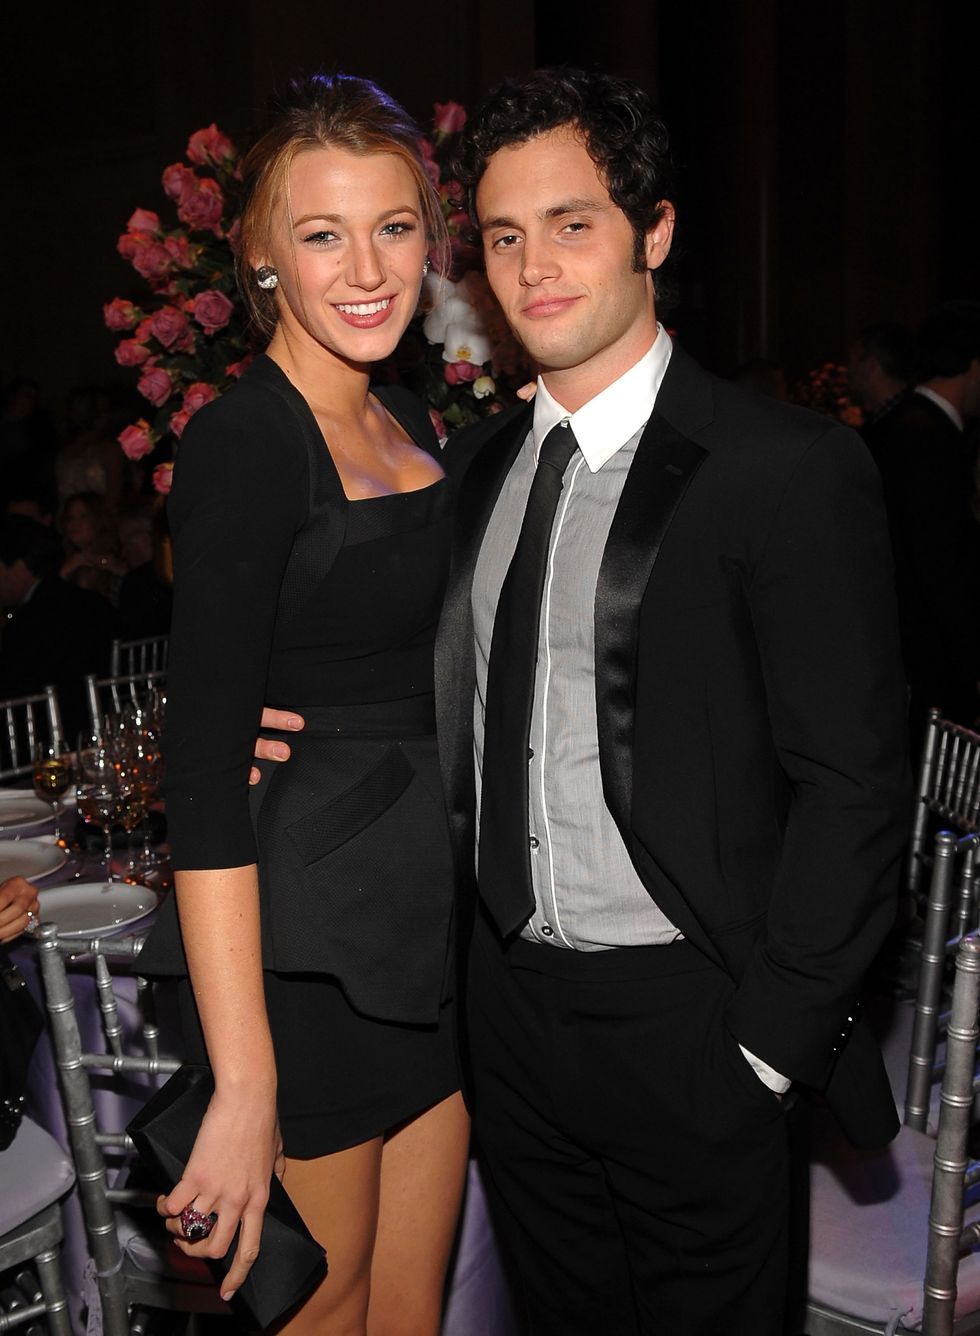 blake lively and penn badgley at the 2009 angel ball